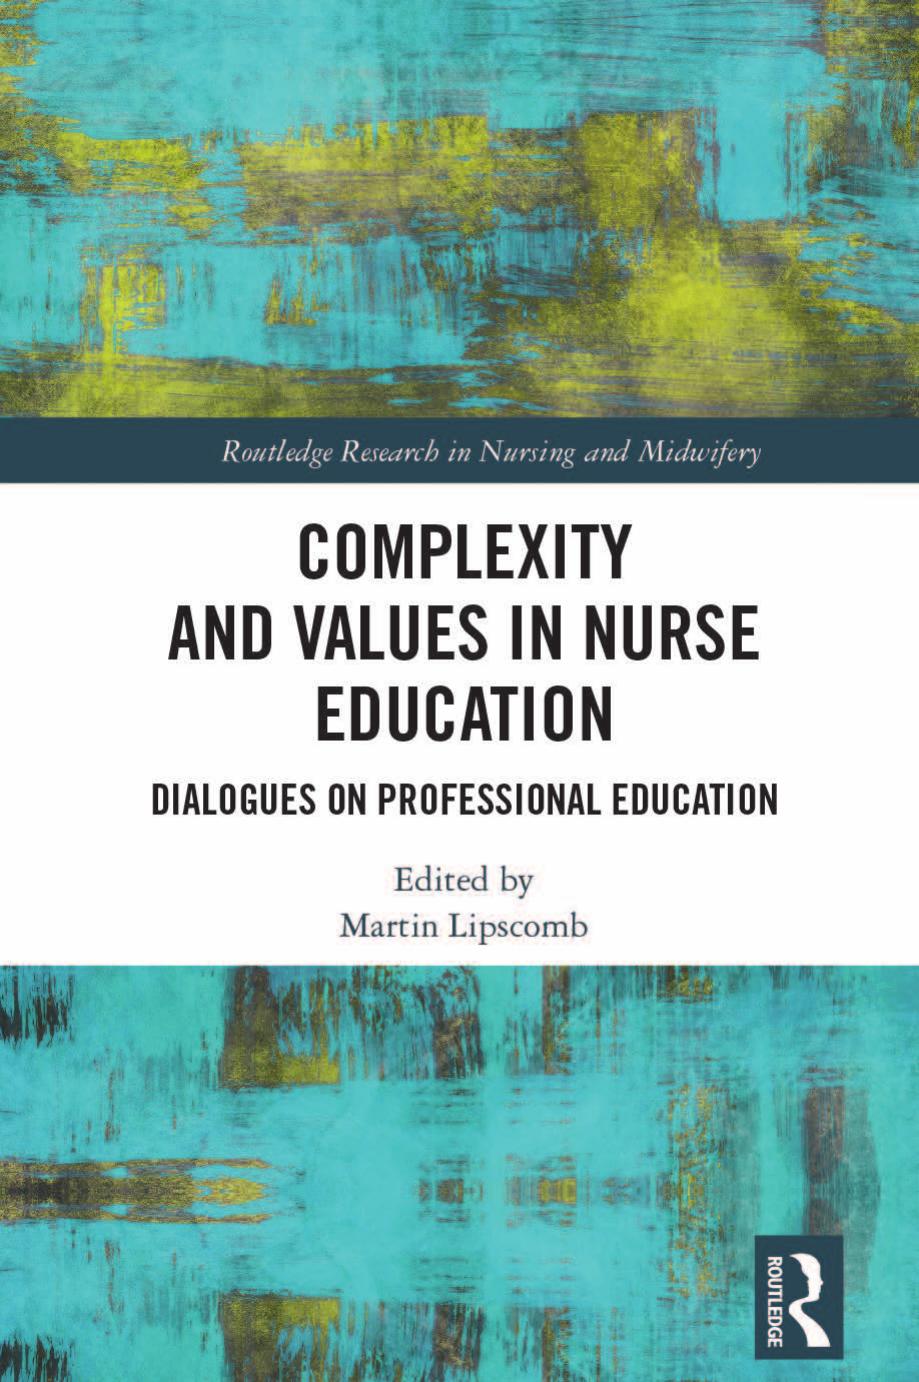 Complexity and Values in Nurse Education; Dialogues on Professional Education